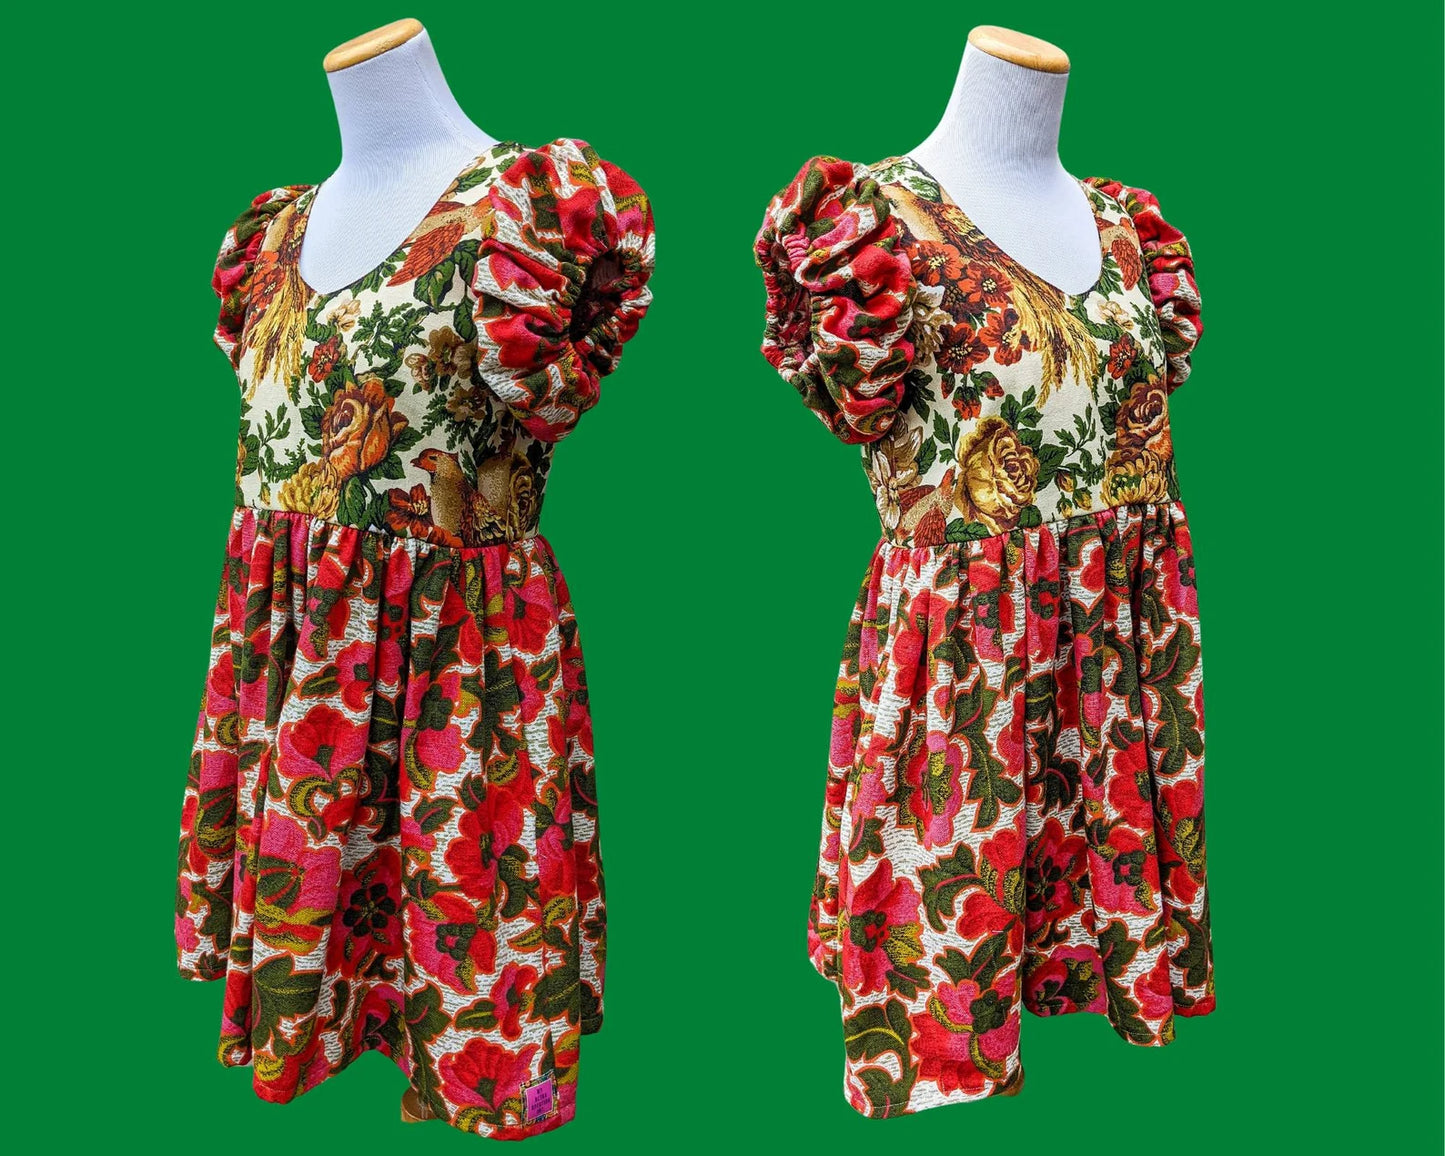 Handmade, Upcycled Vintage 1950's Fabric, Birds and Flowers for the Bodice, Short Puffy Sleeves Dress Size S-M